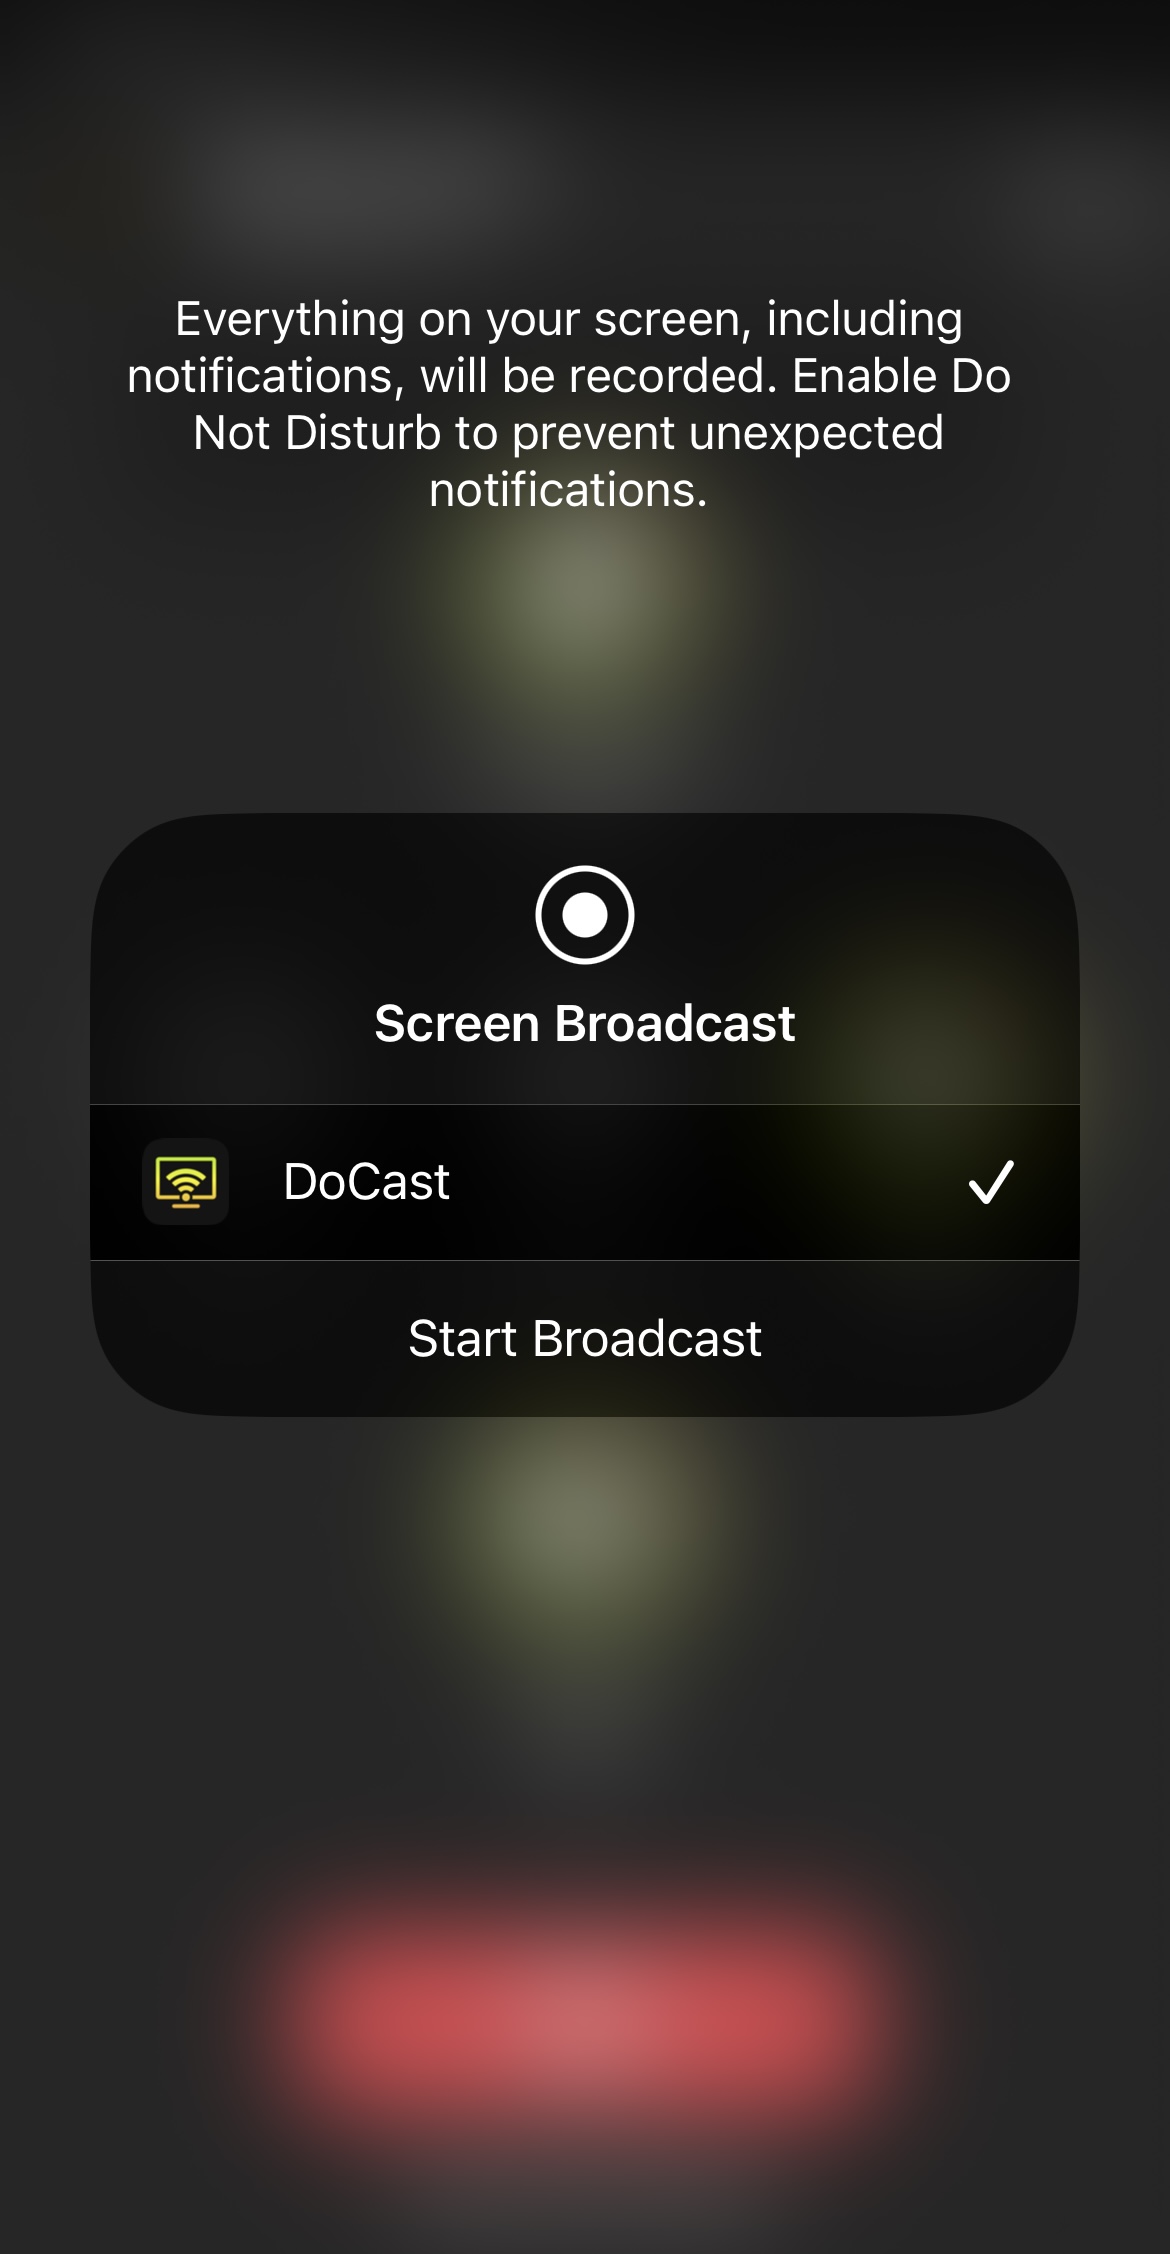 Mirroring iPhone's screen with the DoCast app to TV